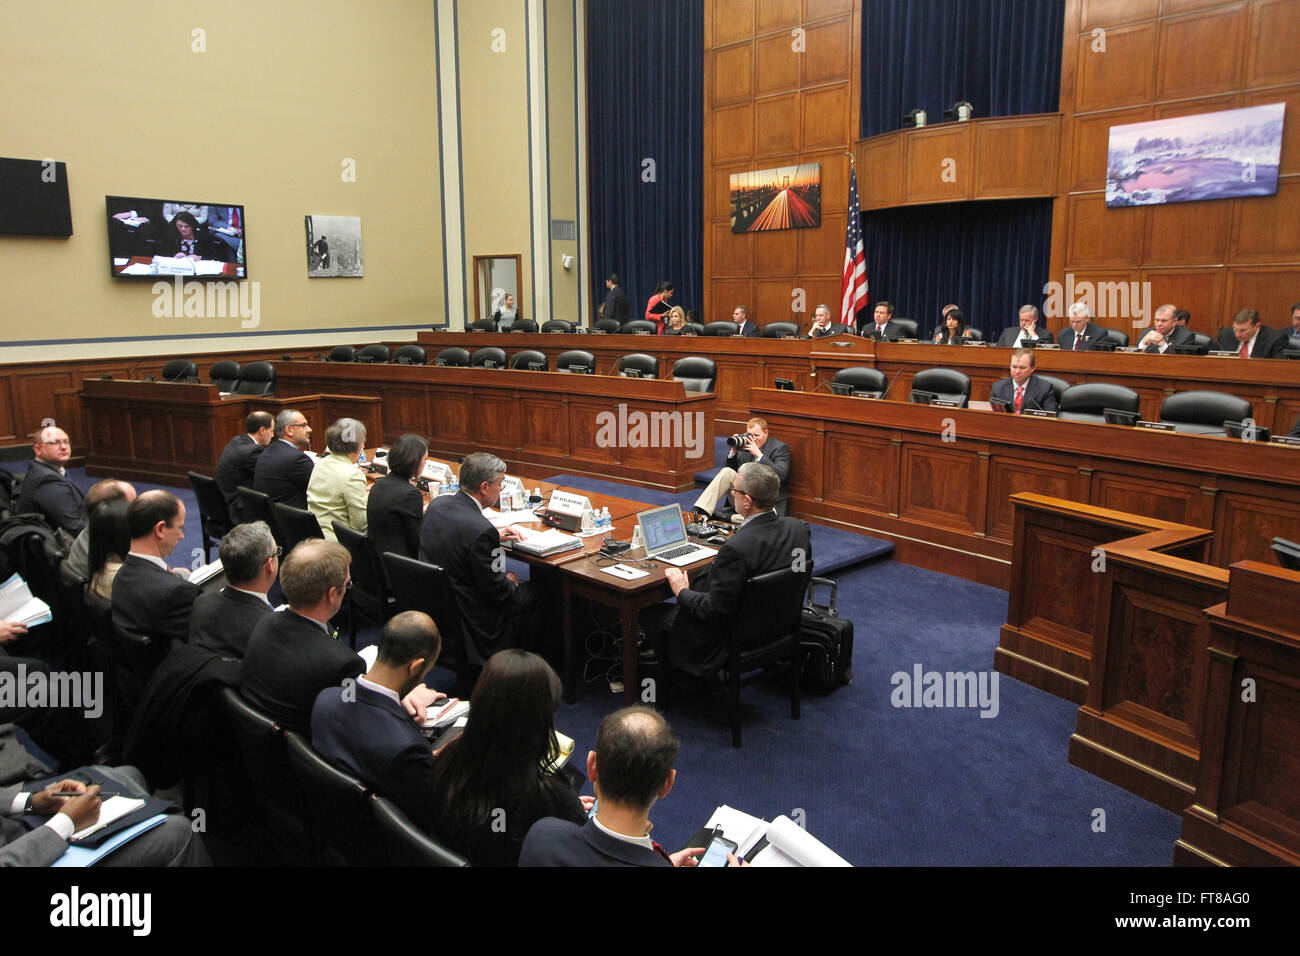 U.S. Customs and Border Protection Commissioner R. Gil Kerlikowske testifies before the House Oversight and Government Reform Subcommittee on Government Operations about the Visa Waiver Improvement and Terrorist Travel Prevention Act in Washington, D.C., Feb. 10, 2016. (U.S. Customs and Border Protection Photo by Glenn Fawcett) Stock Photo